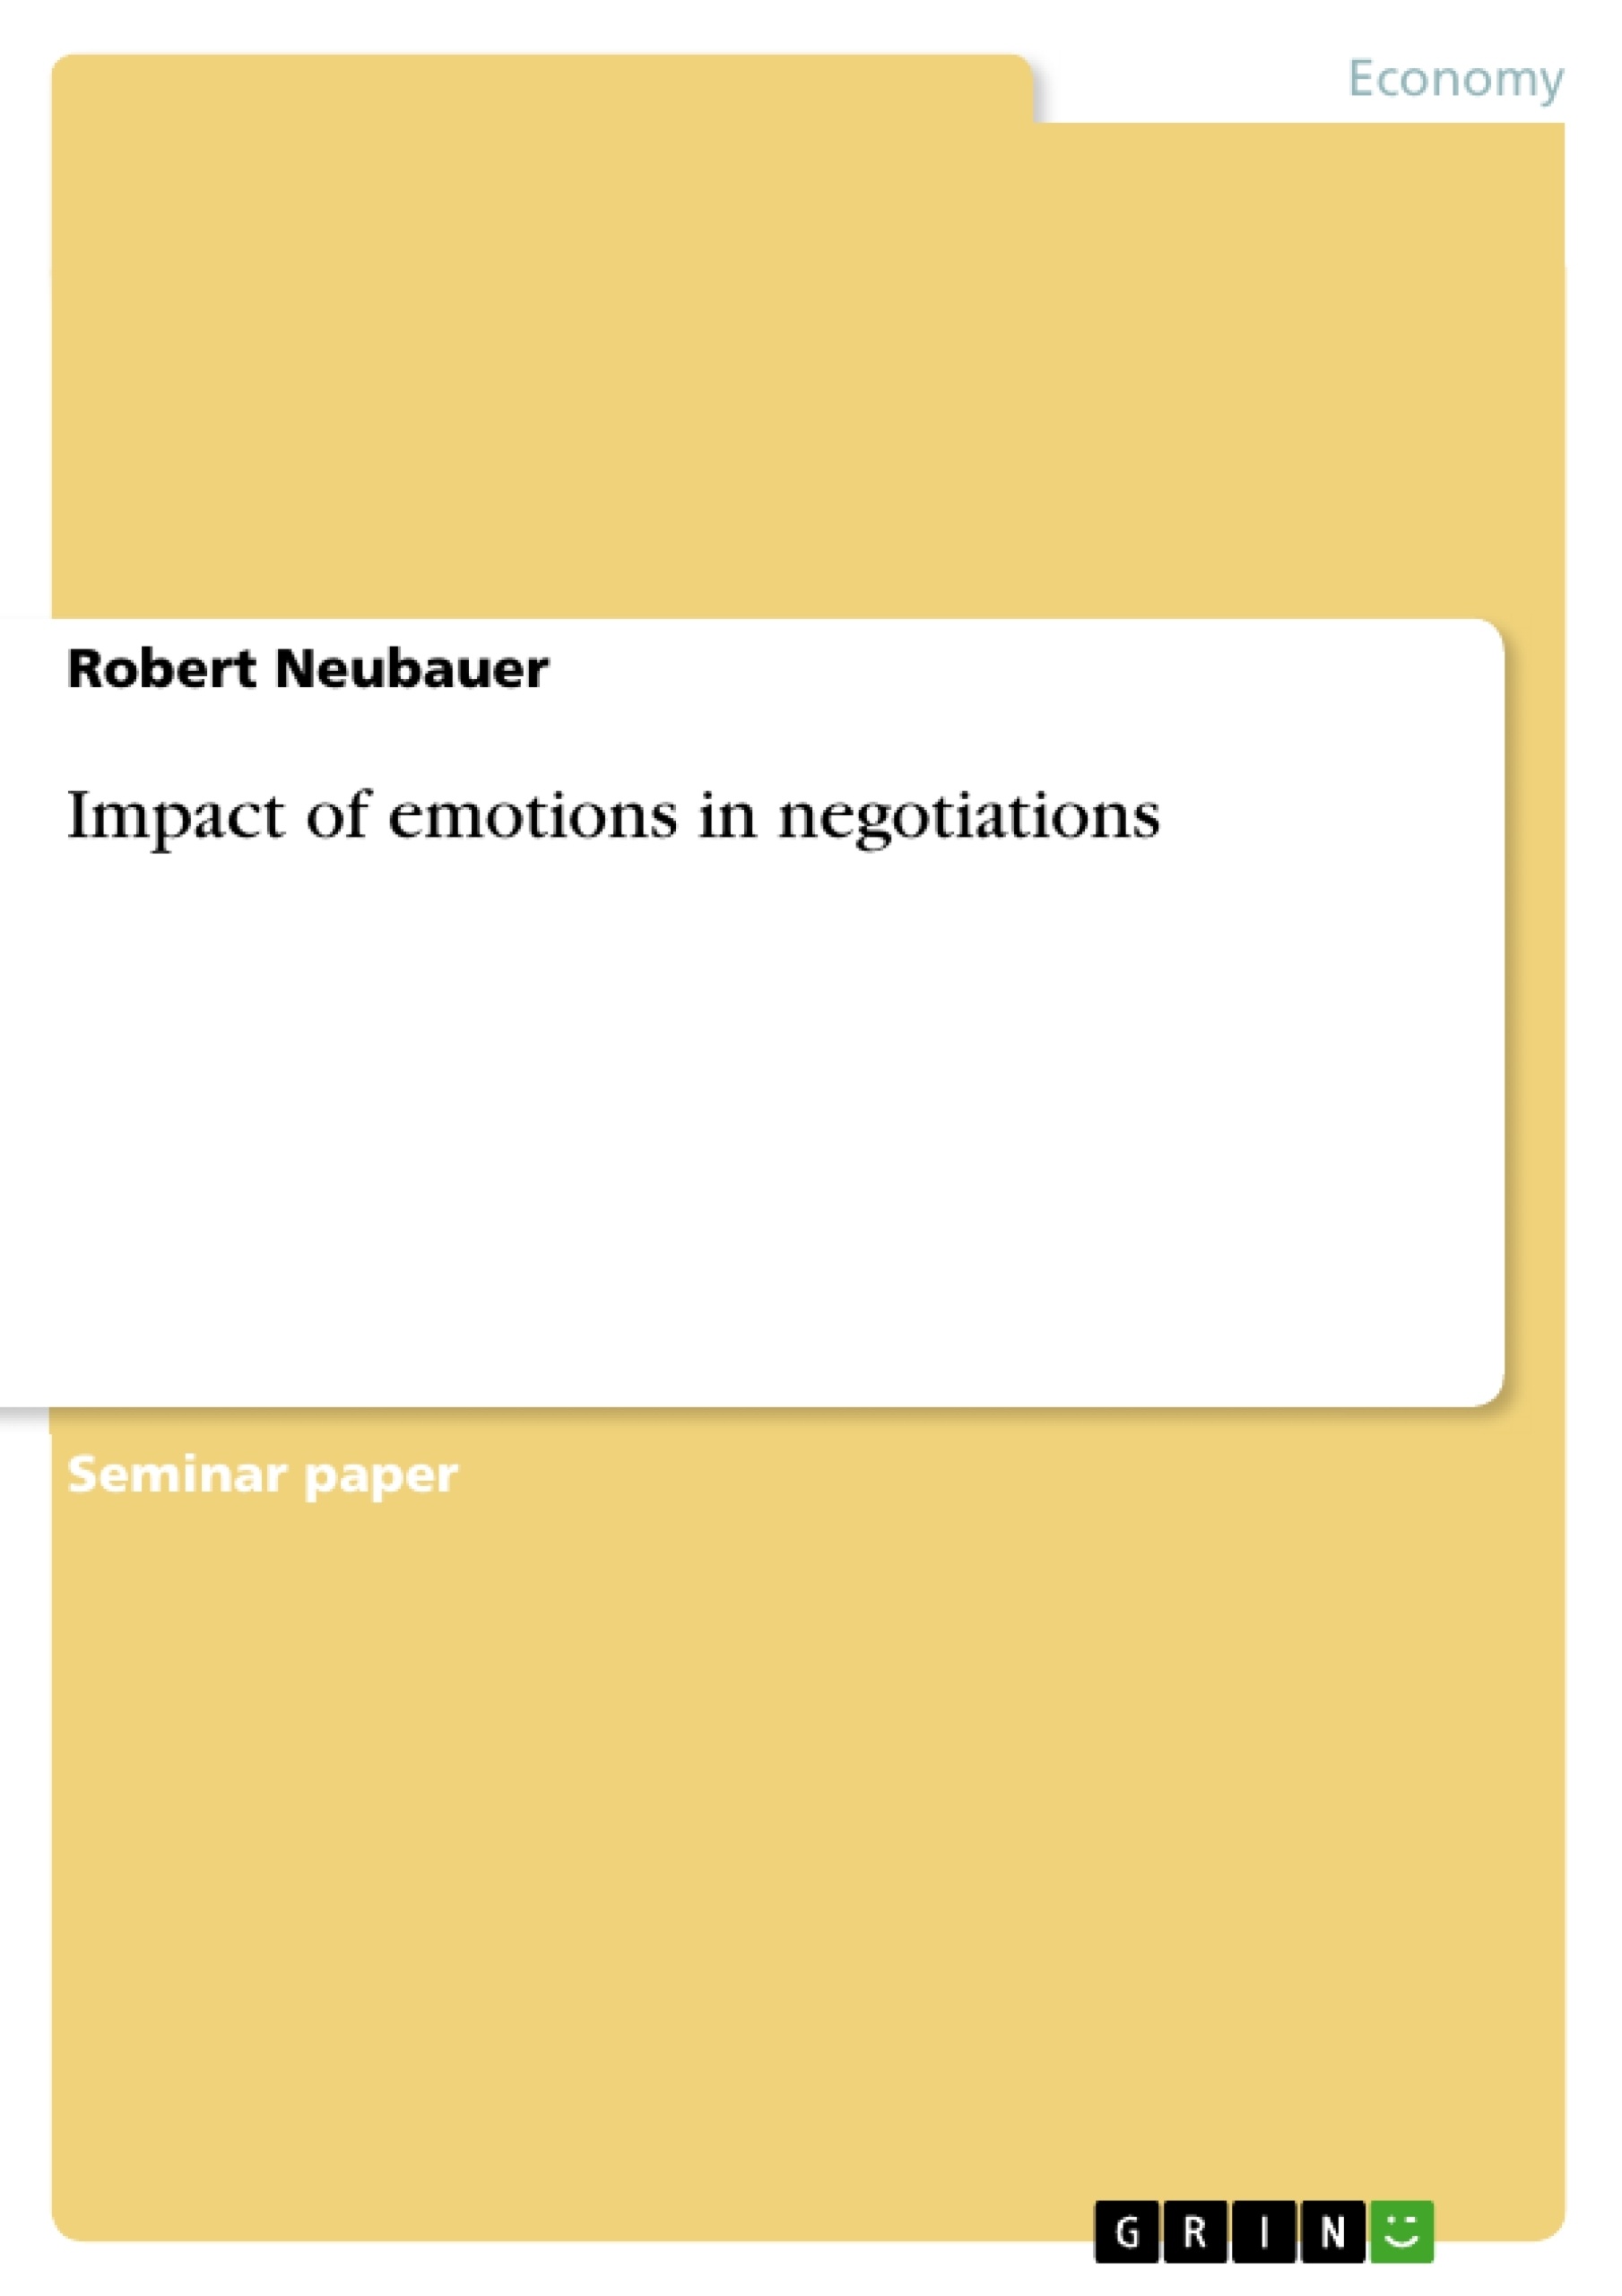 Title: Impact of emotions in negotiations